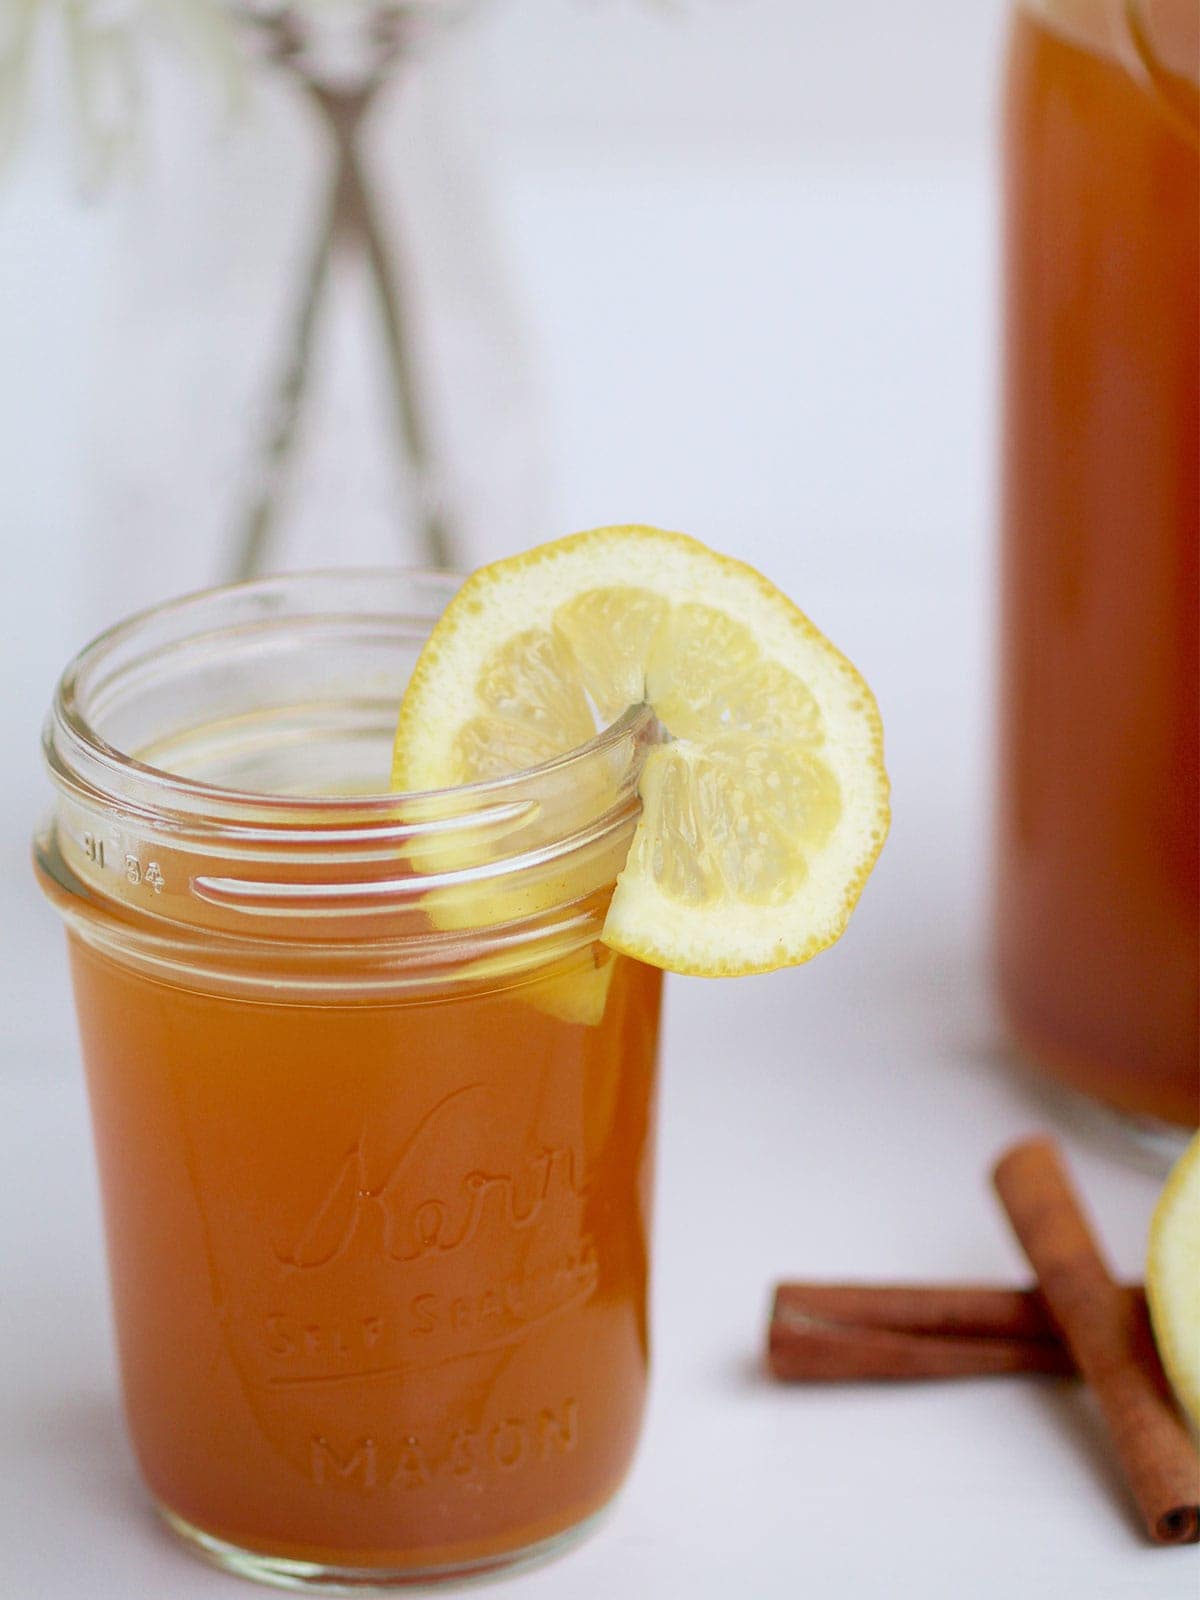 Fight Cold and Flu Season with this Lemon Ginger Tea!